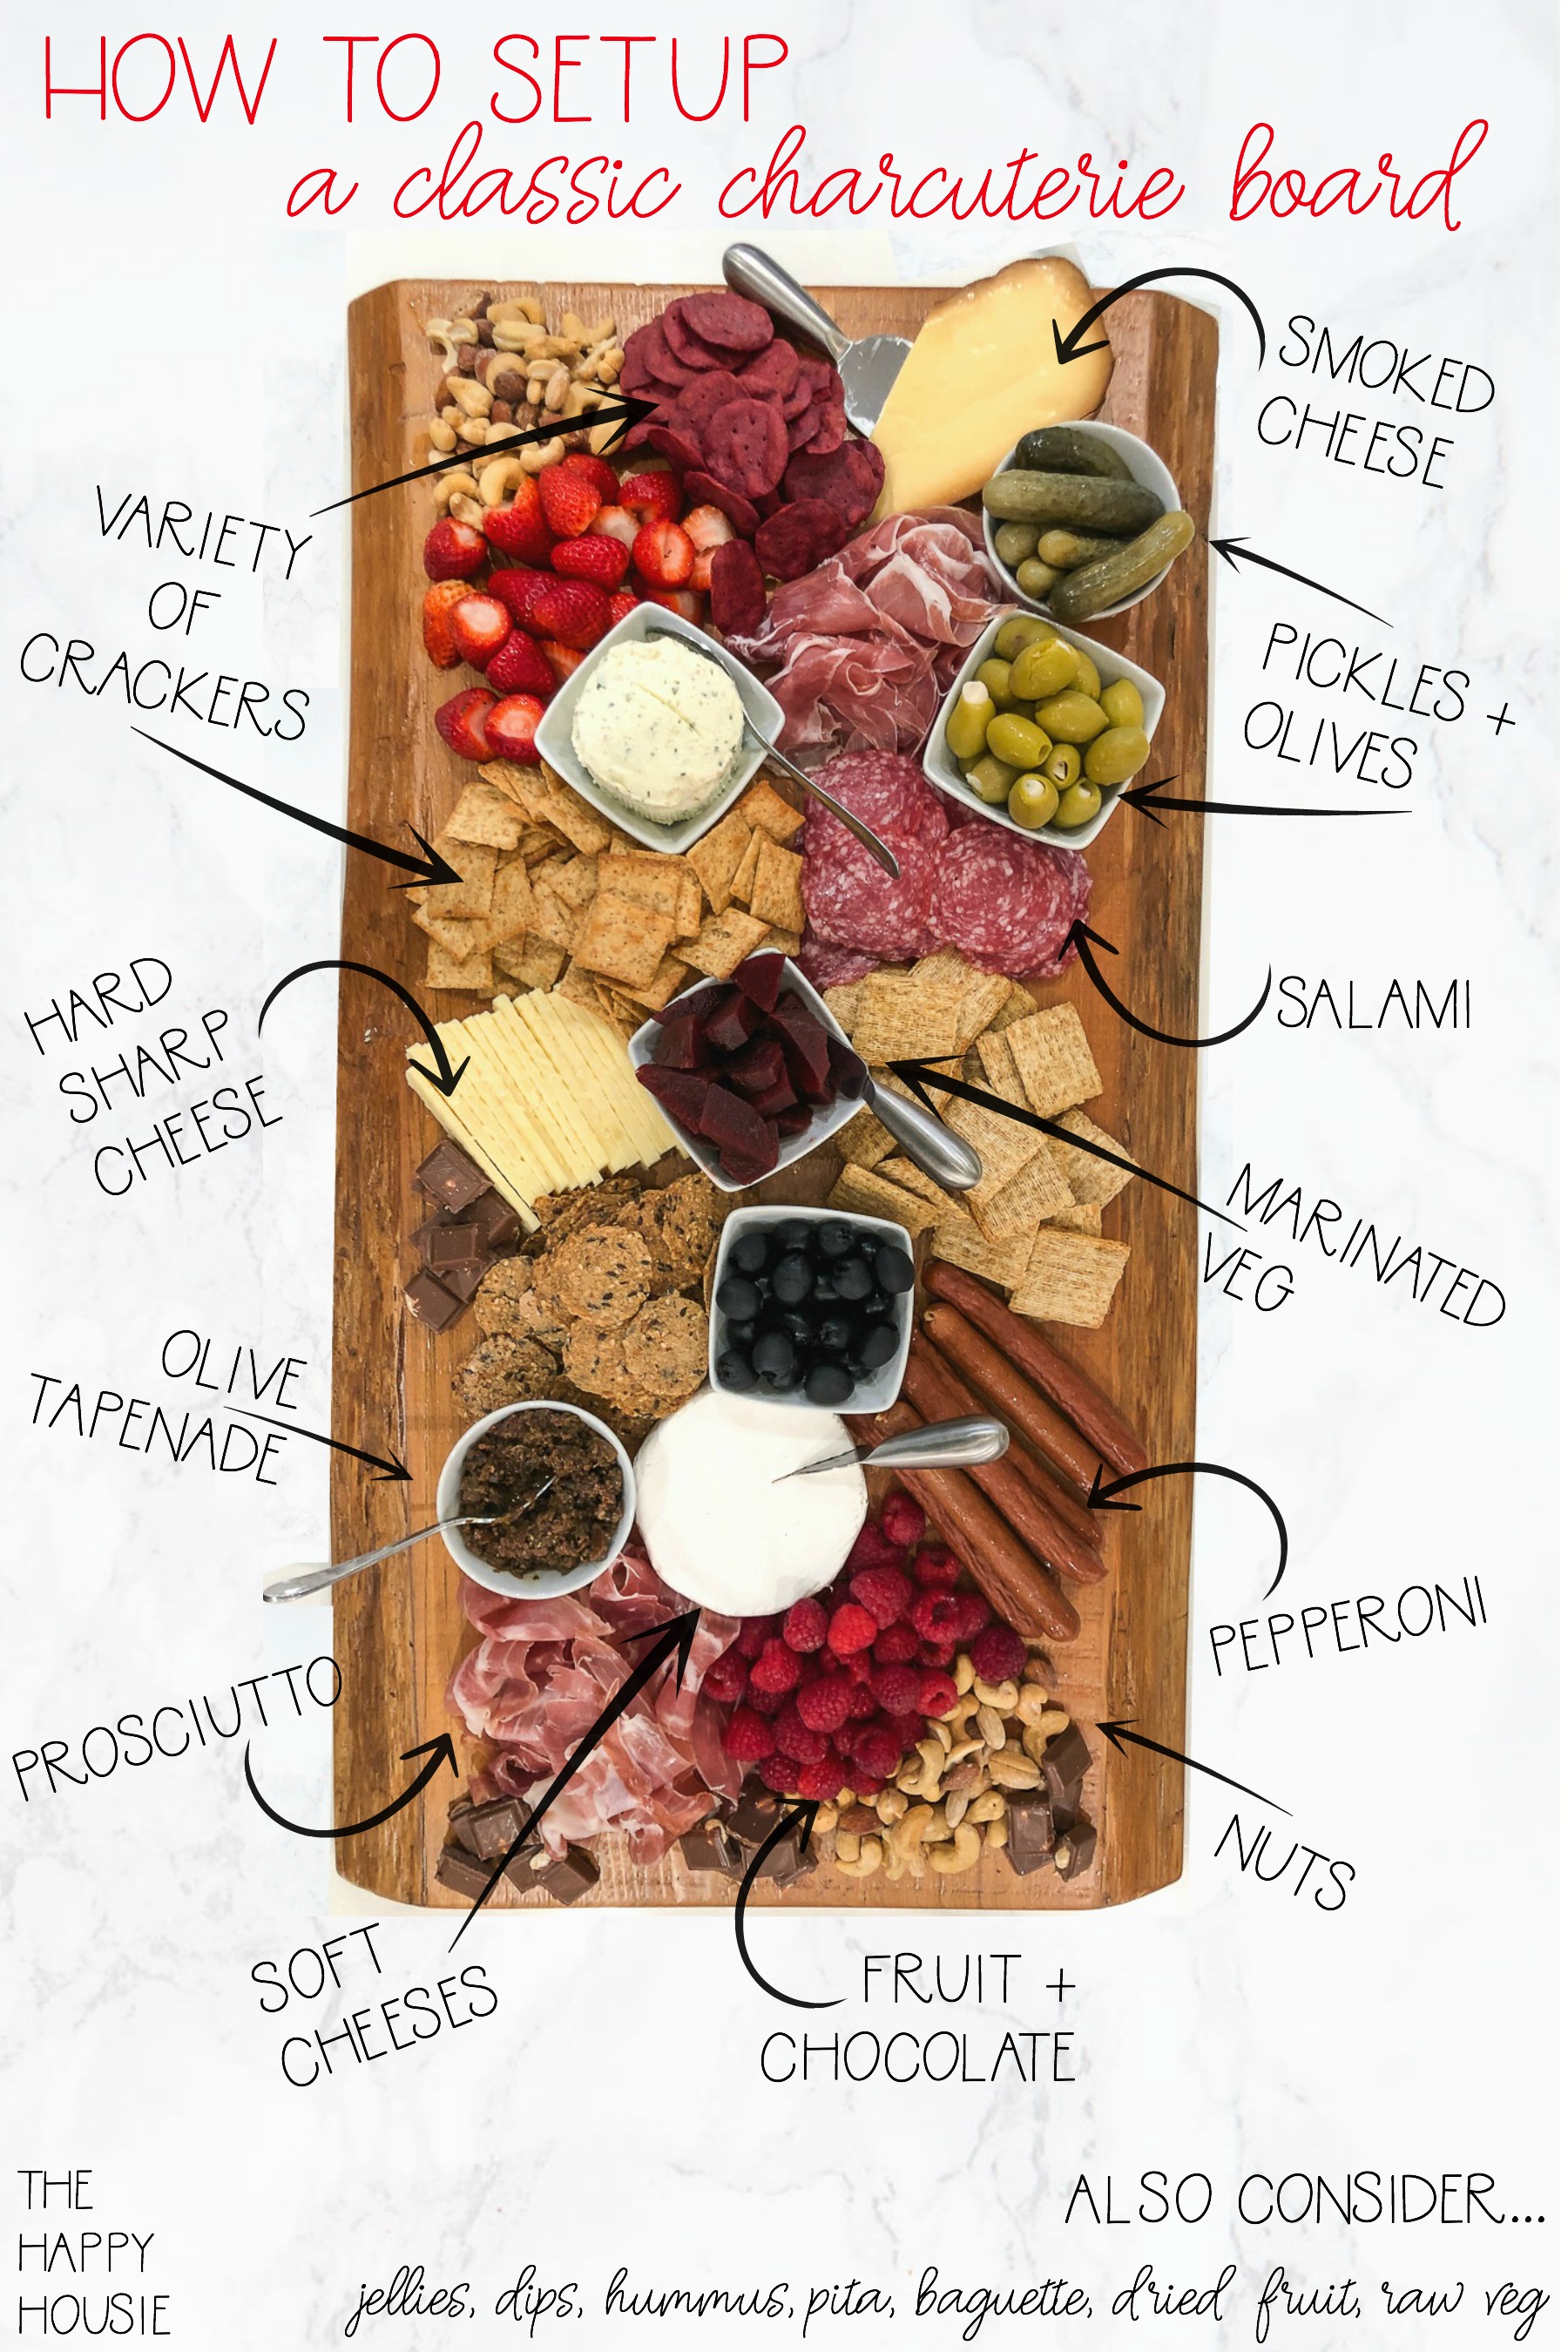 How to setup a classic charcuterie board with everything itemized.